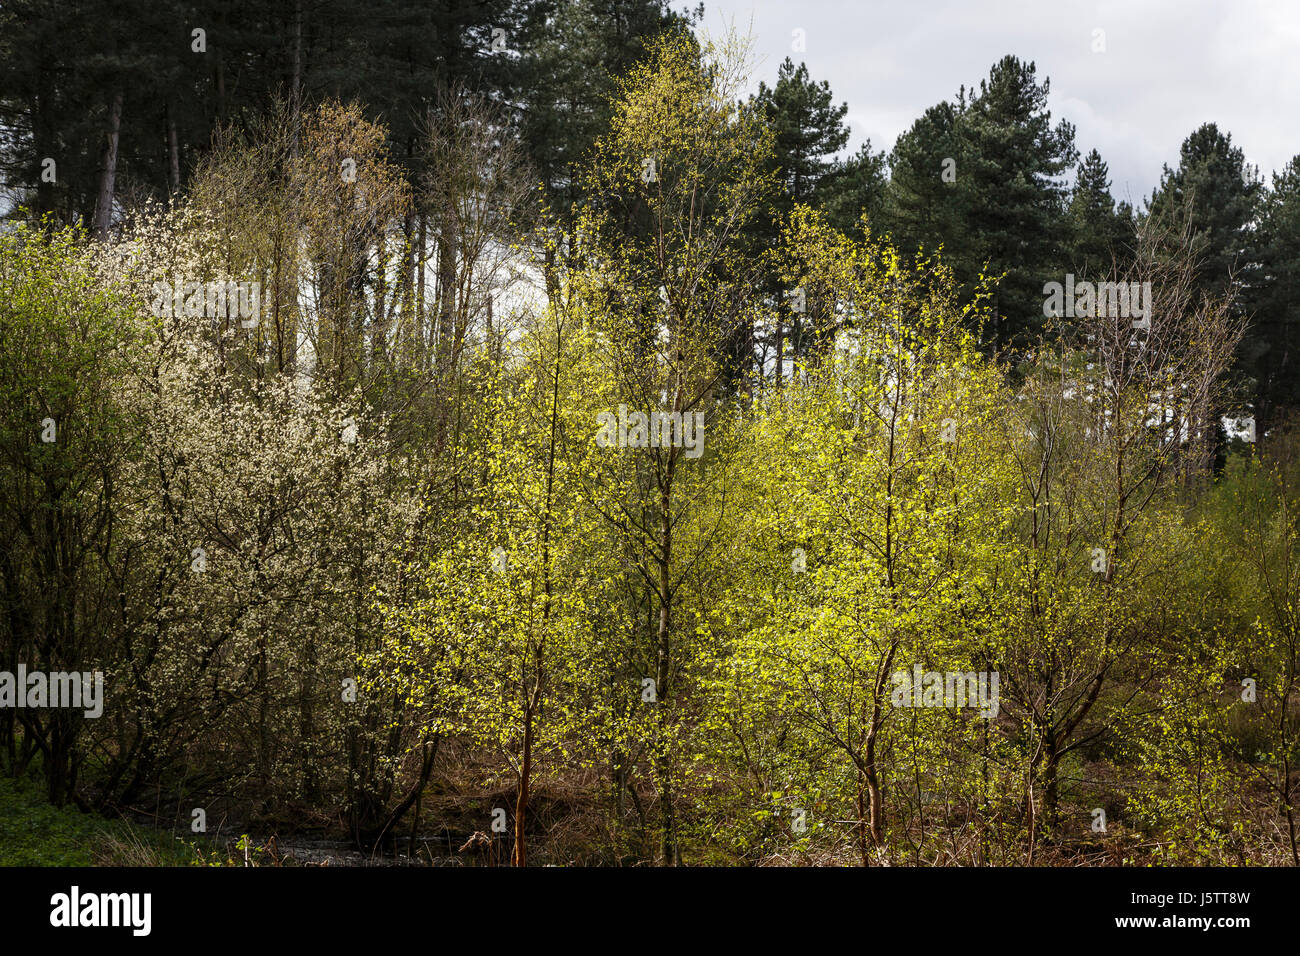 Early spring in Delamere Forest, Cheshire Stock Photo